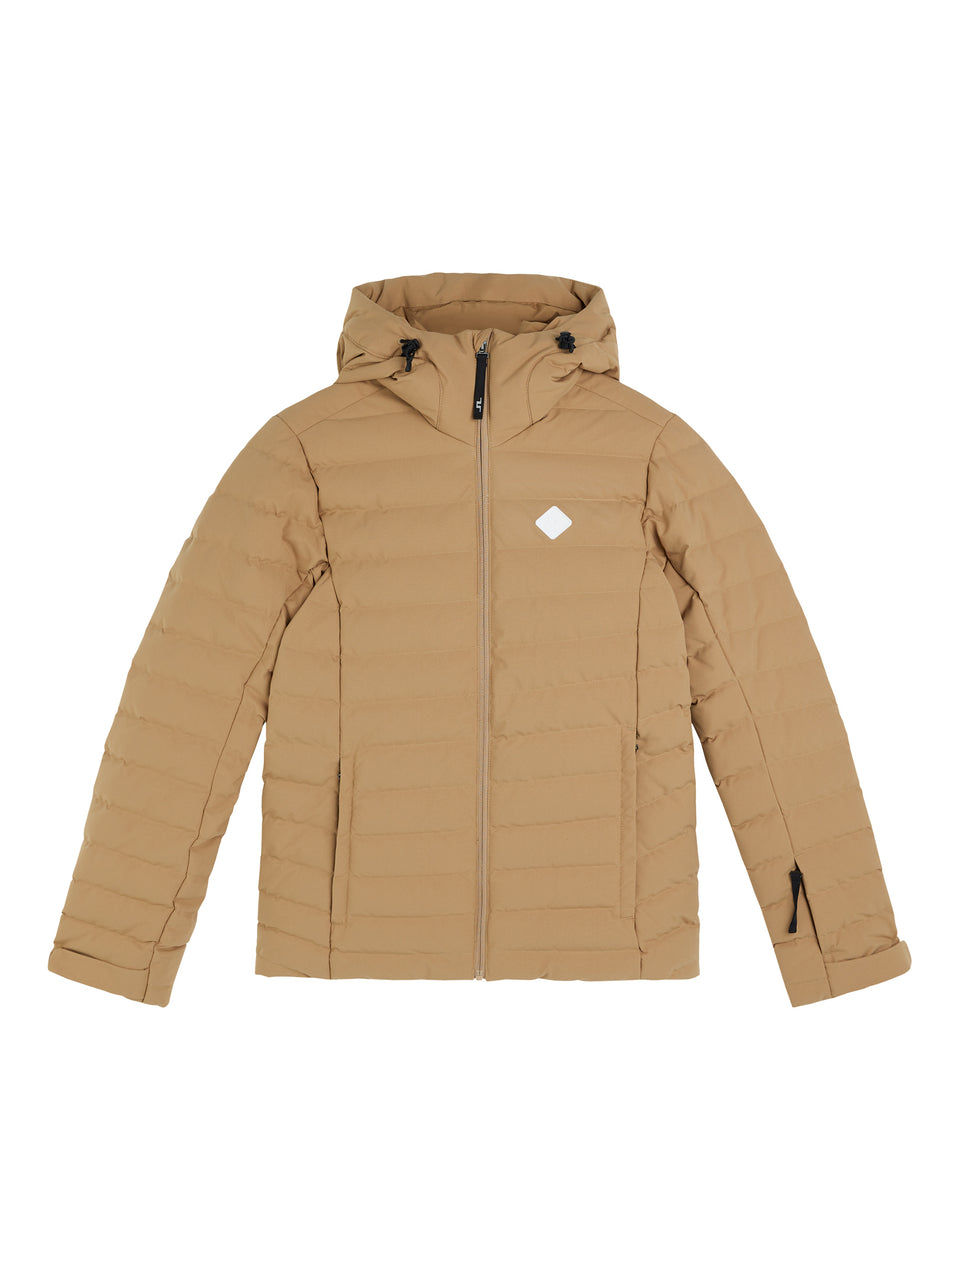 W Thermic Pro Down Jacket / Tiger Brown